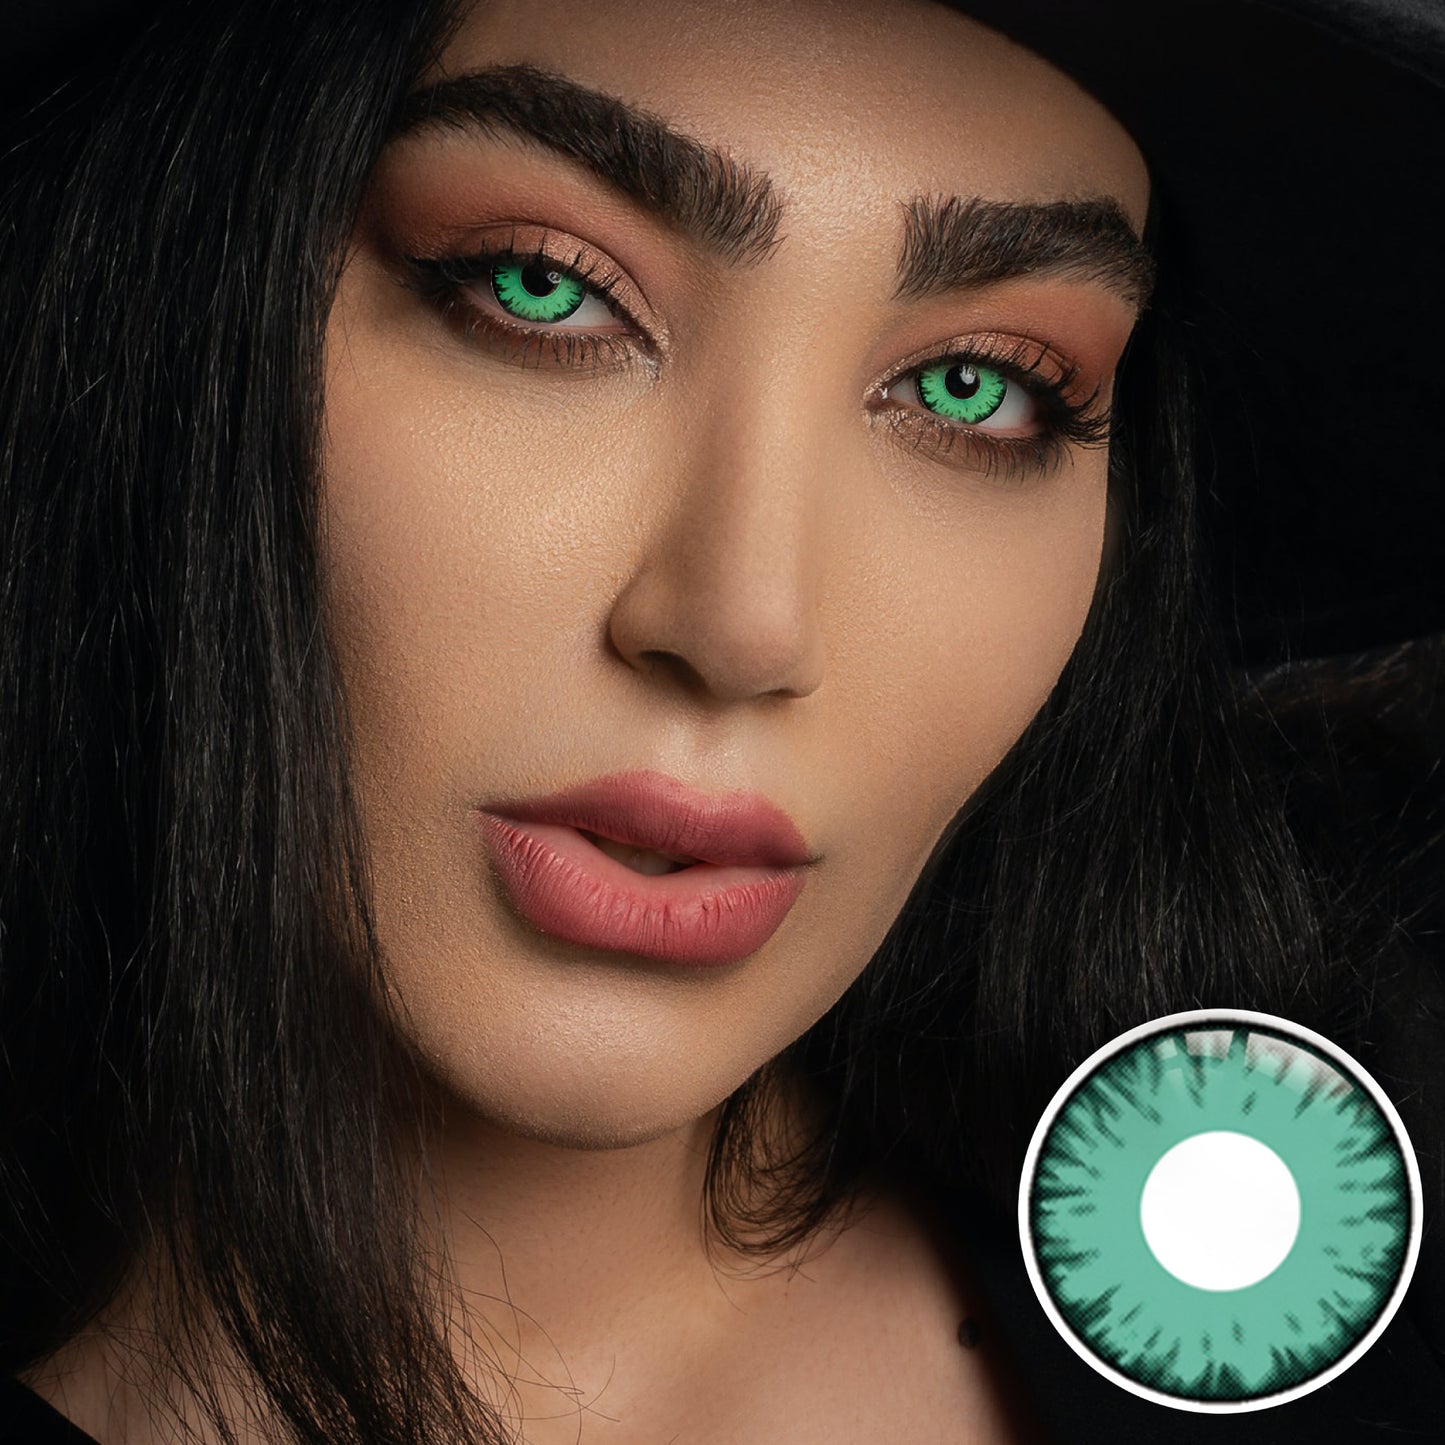 1Pcs FDA Certificate Eyes Colorful Contact Lenses - Dazzle green